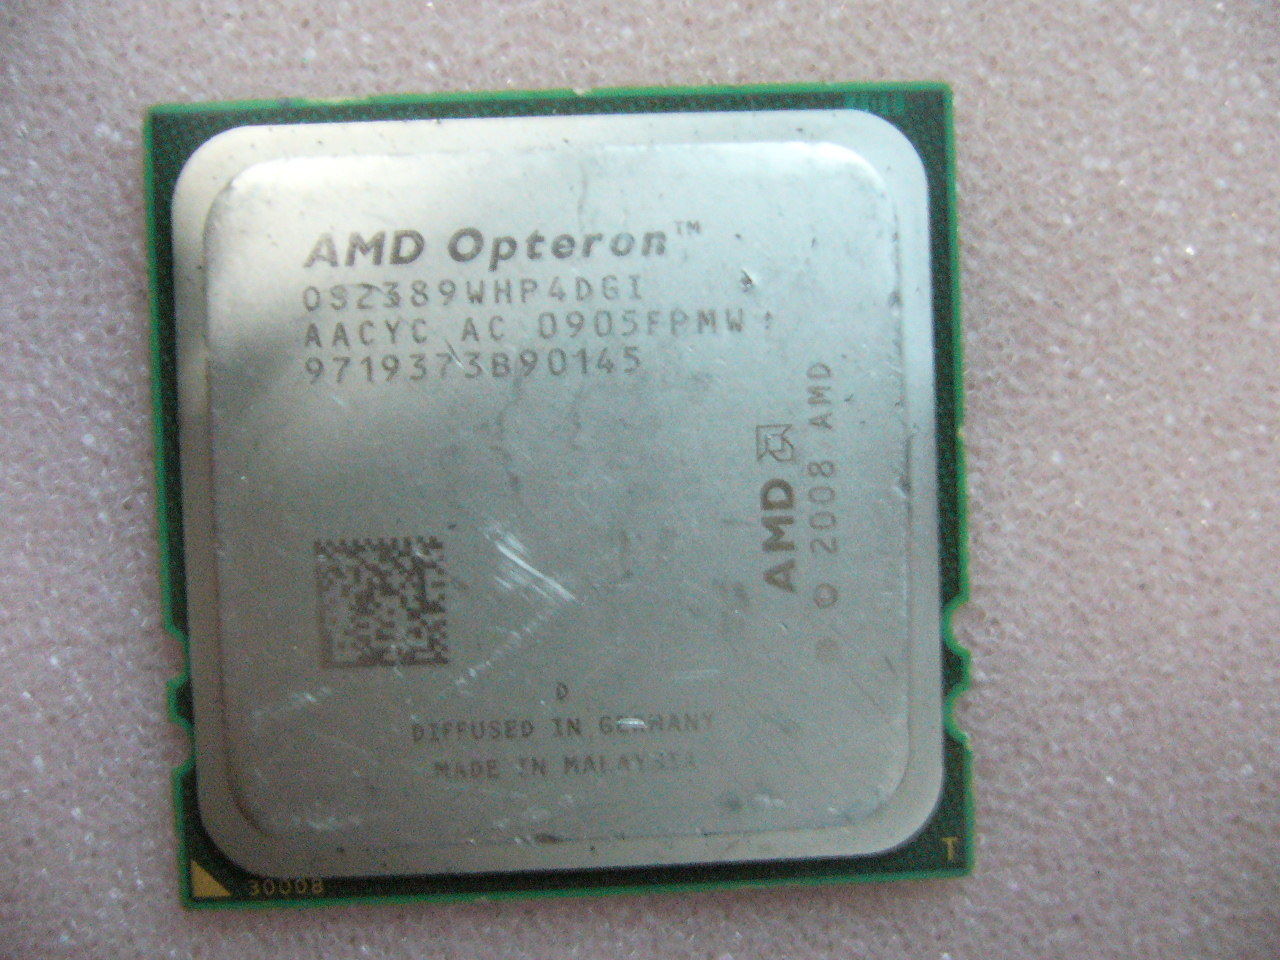 QTY 1x AMD Opteron 2389 2.9 GHz Quad-Core (OS2389WHP4DGI) CPU Socket F 1207 - Click Image to Close